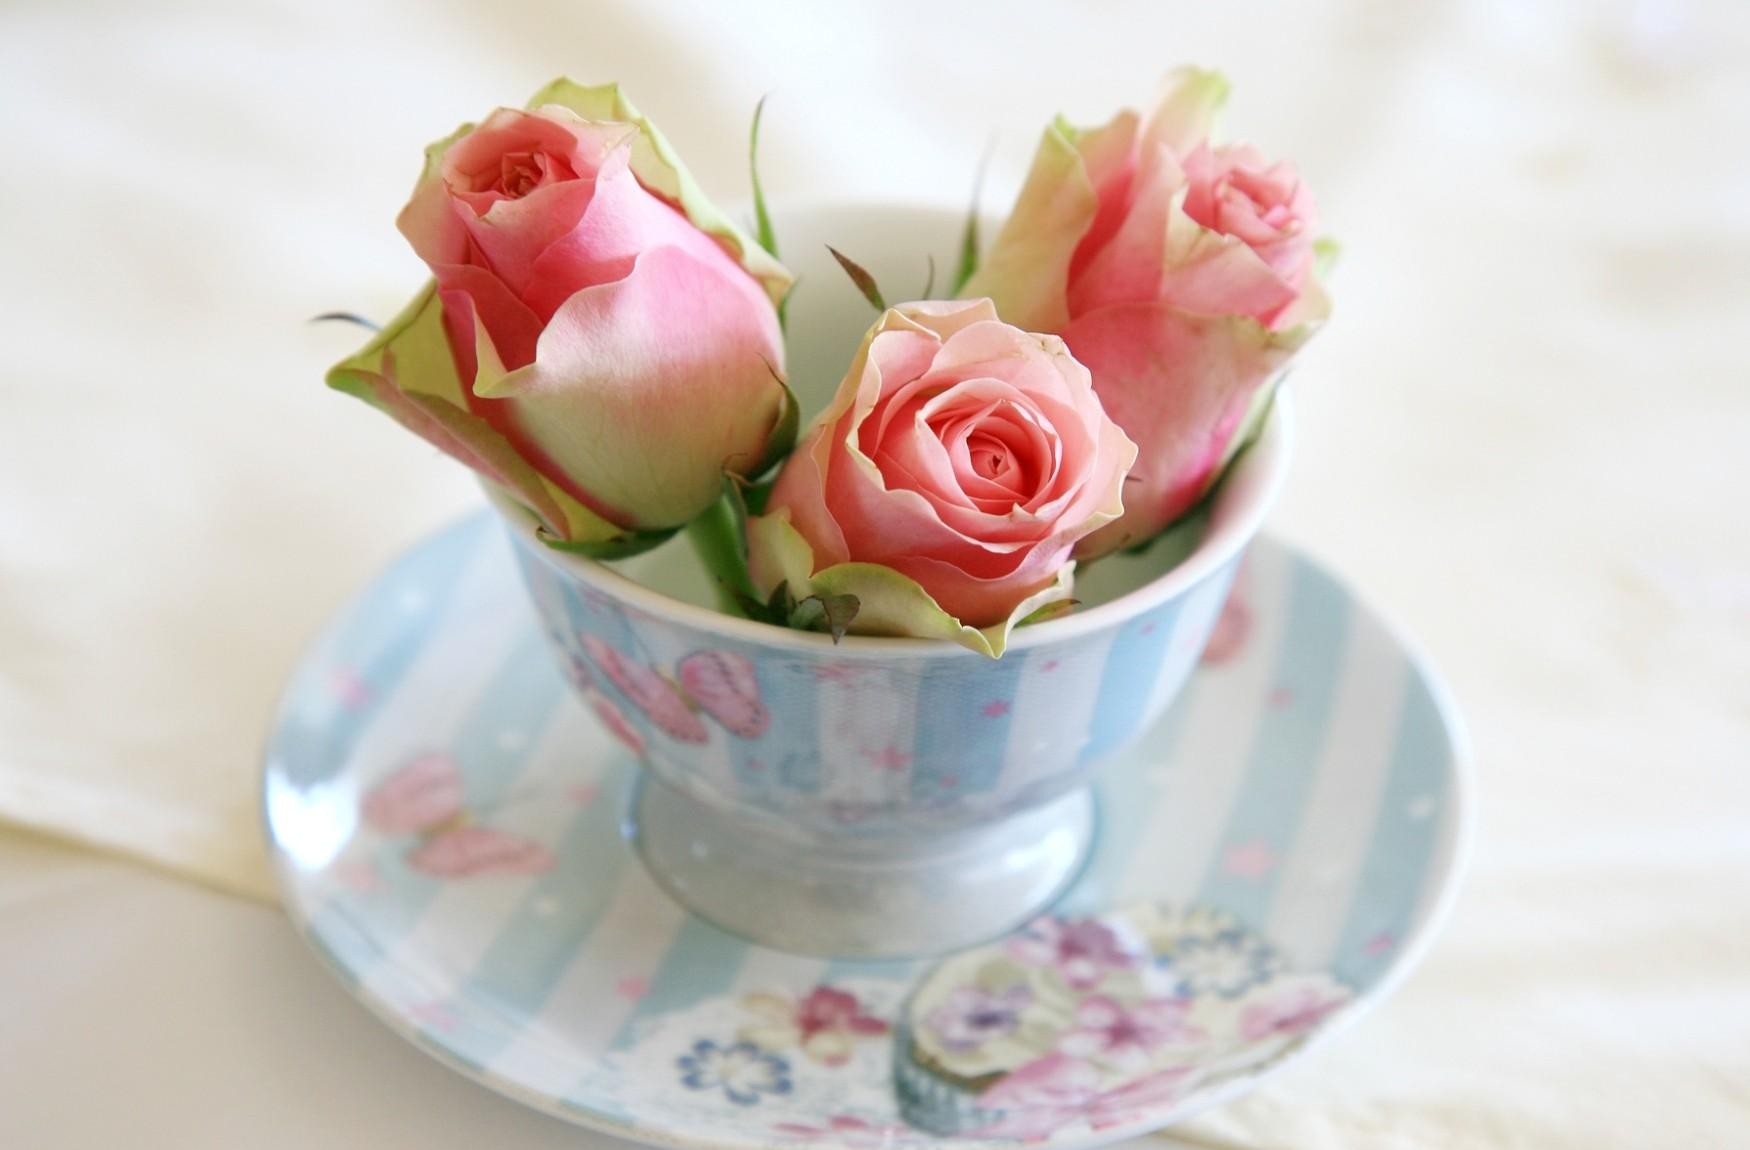 flowers, roses, cup, buds, saucer